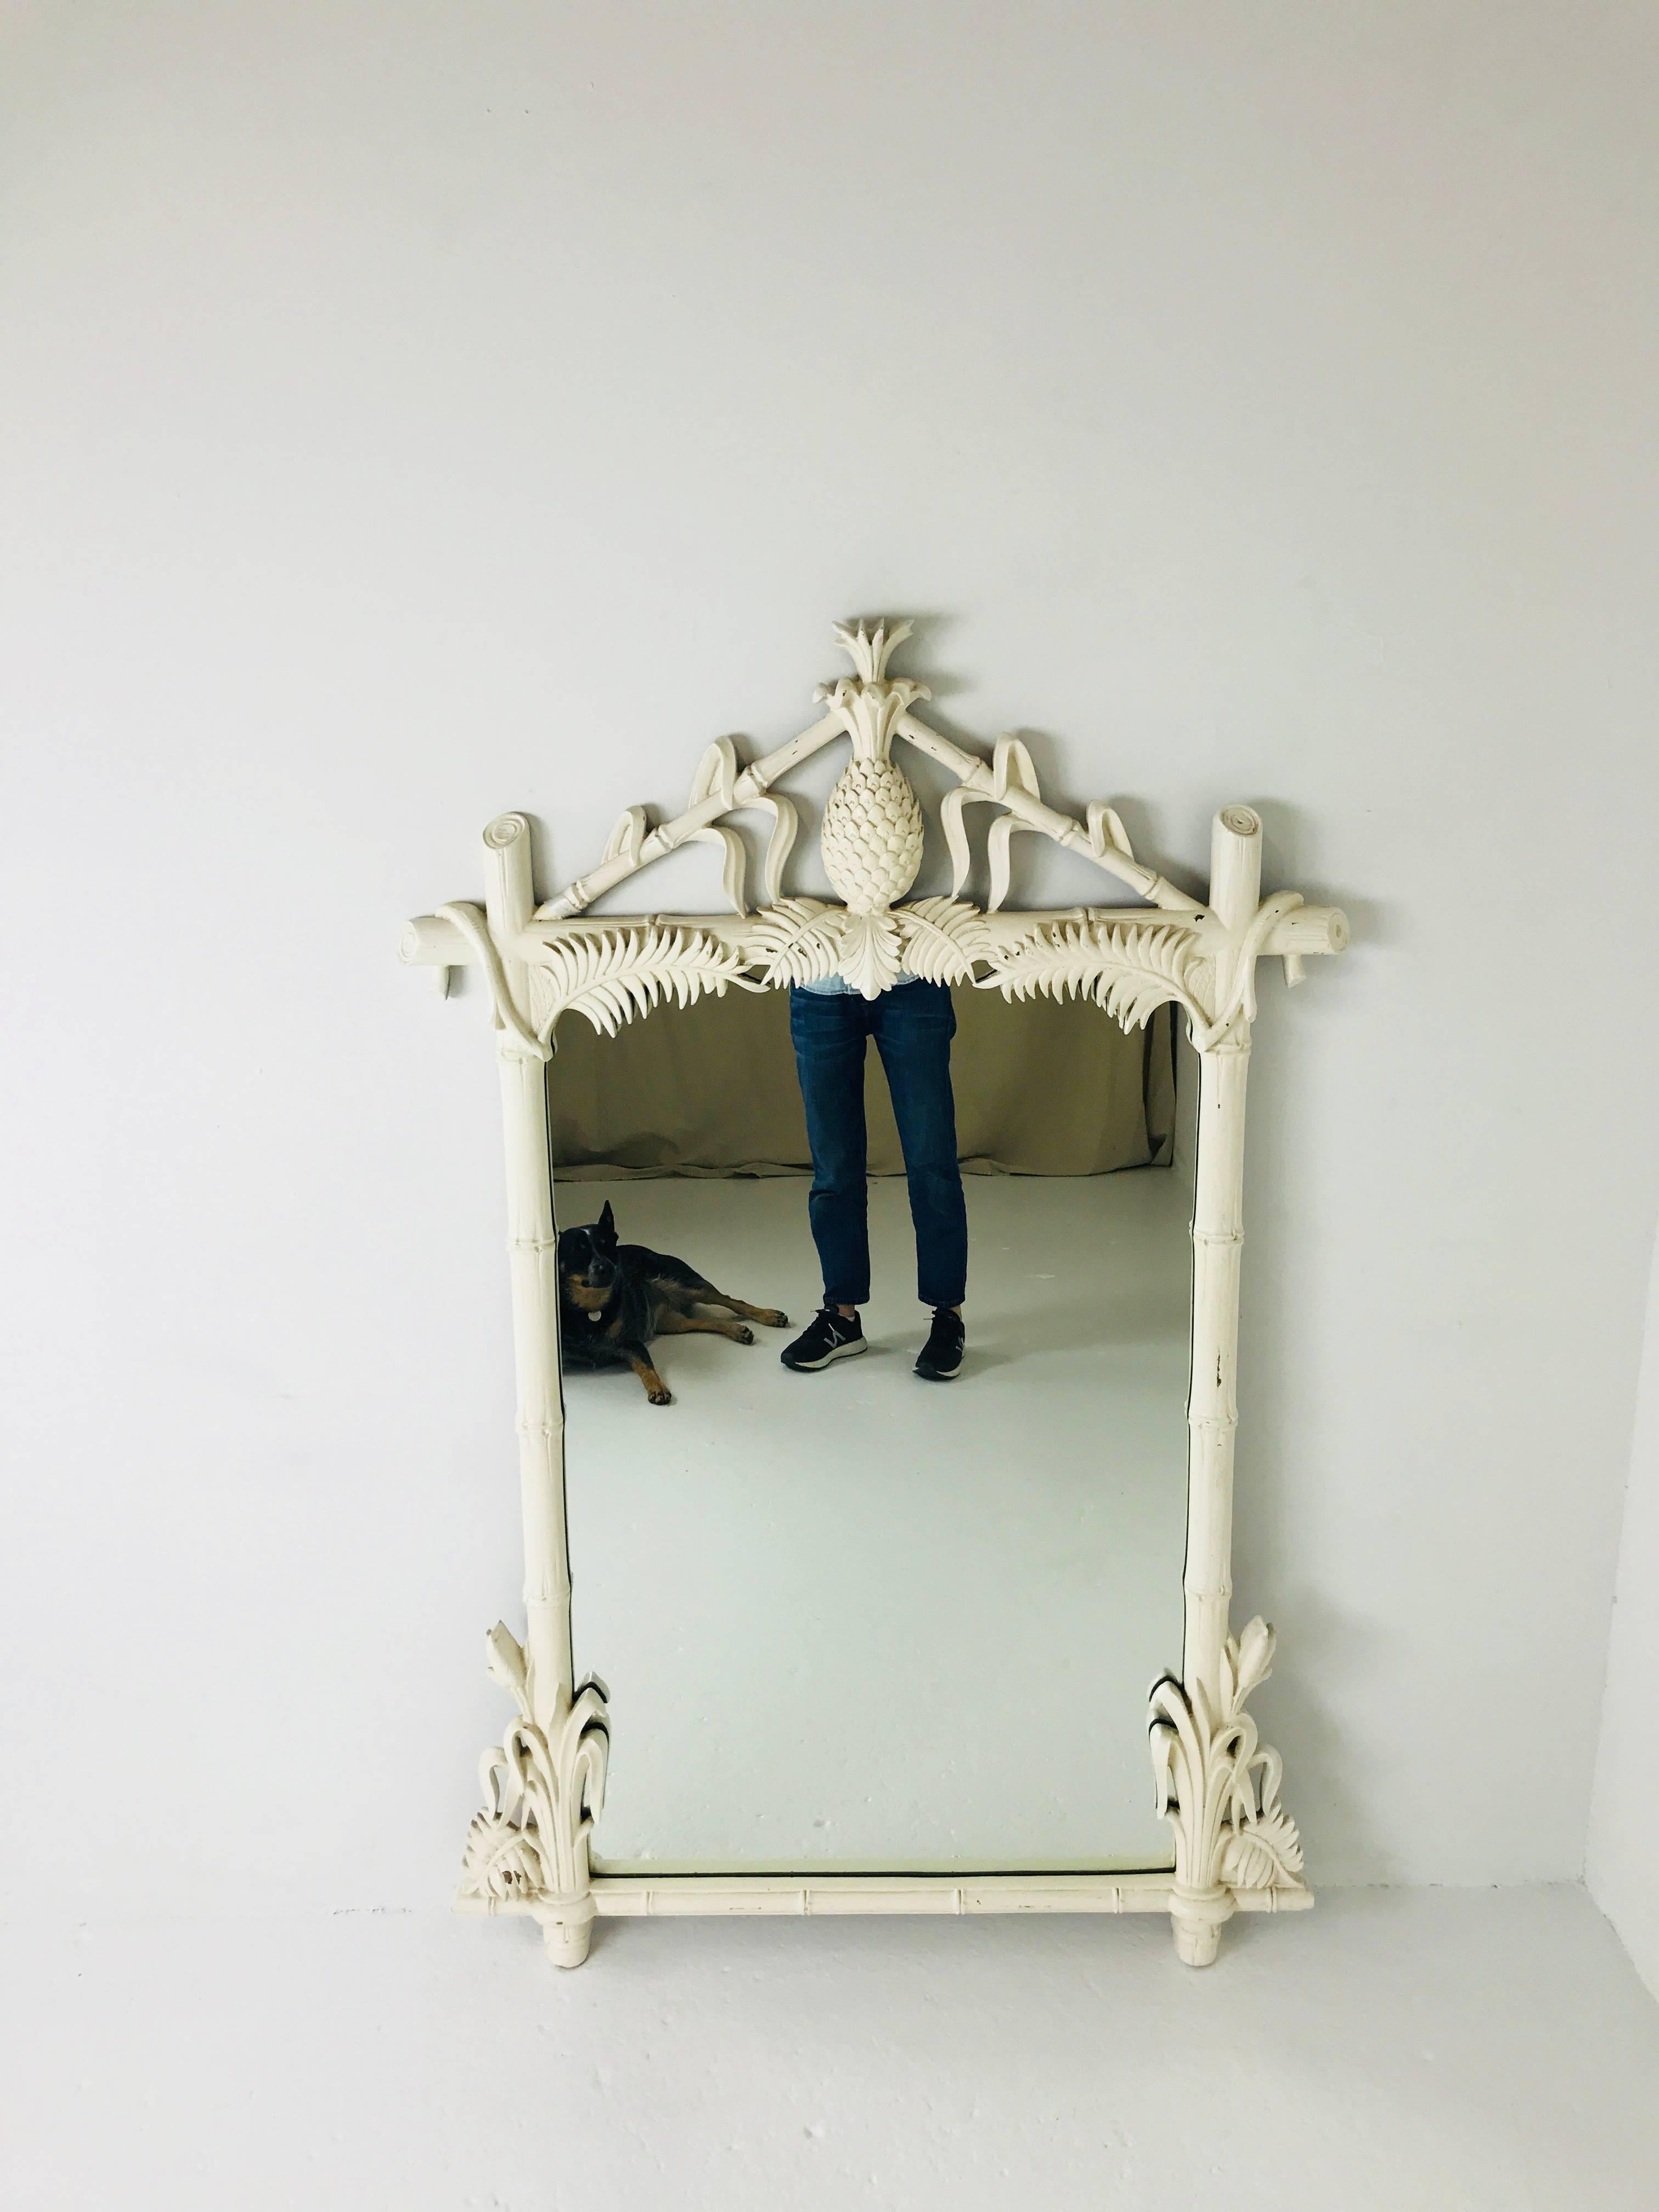 Stunning Hollywood Regency lacquered Pineapple faux bamboo wall mirror by Gampel-Stoll. This Chinoiserie style mirror has a carved pineapple at top of mirror and palm frond leaves the lend to a more tropical feel. Mirror is in good vintage condition